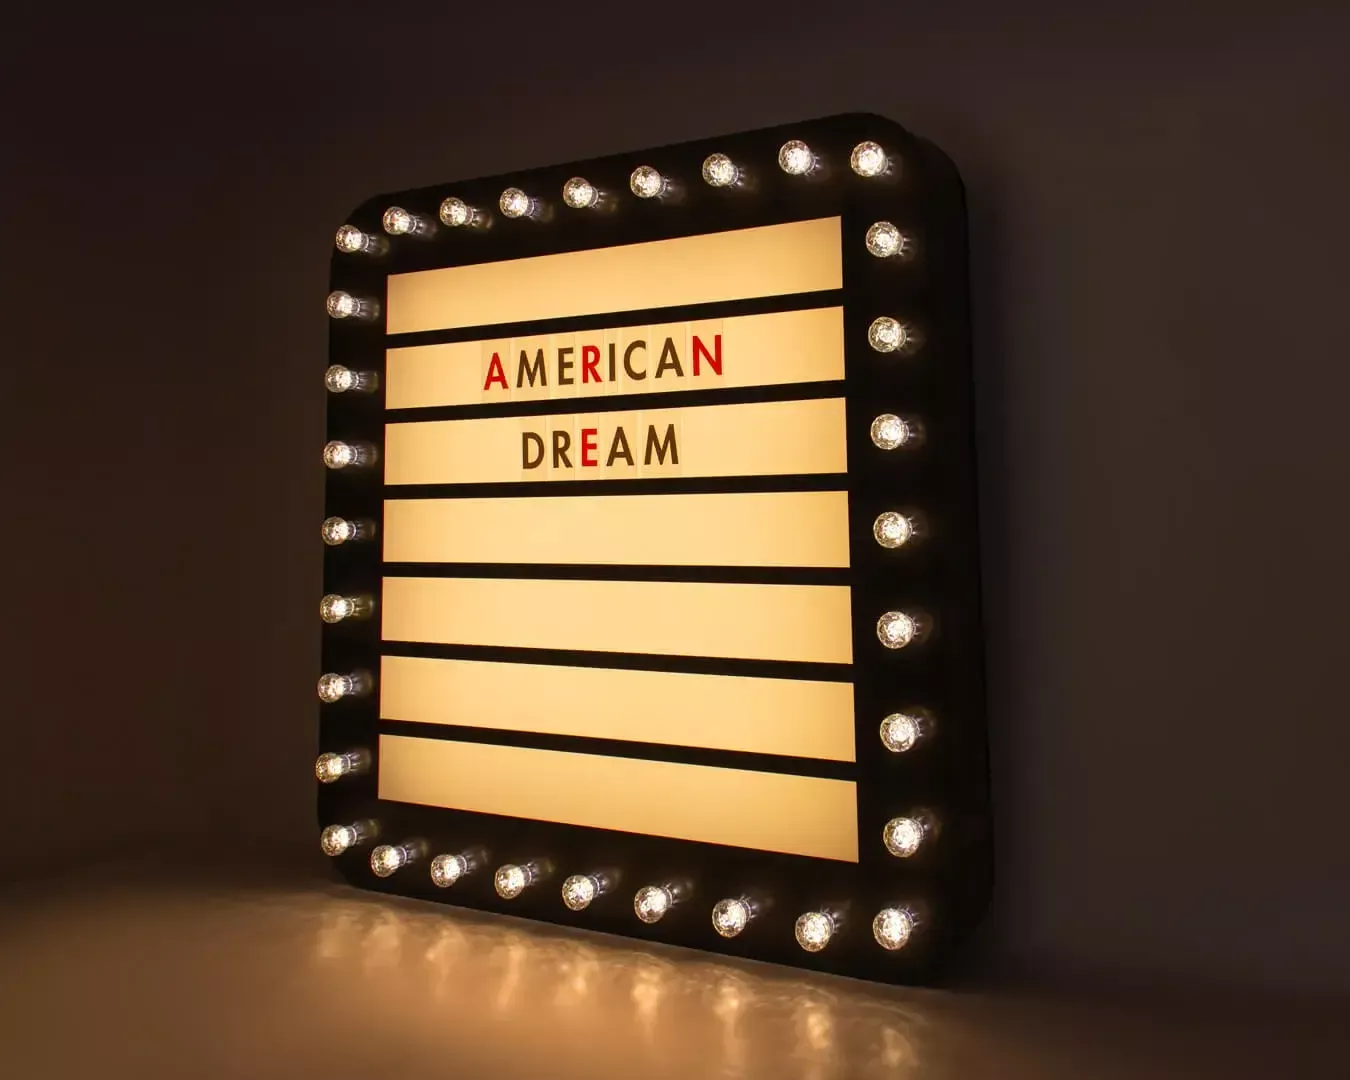 American Dream - A light bulb board, with changeable letters, in retro style.